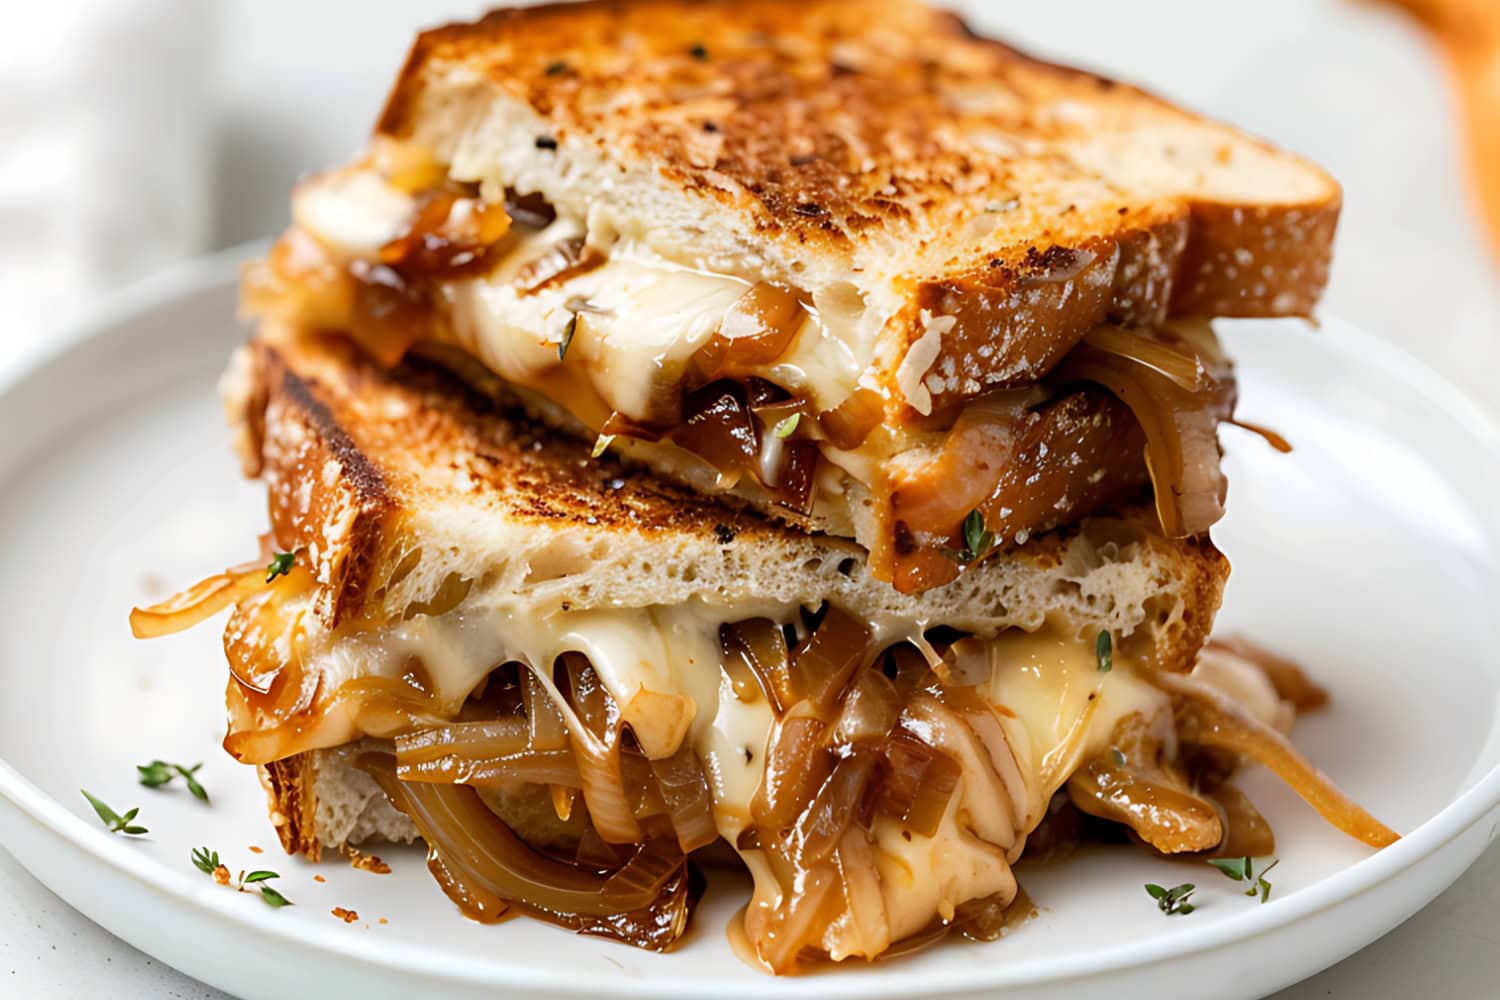 Cheesy French Onion grilled cheese sandwich in a white plate.